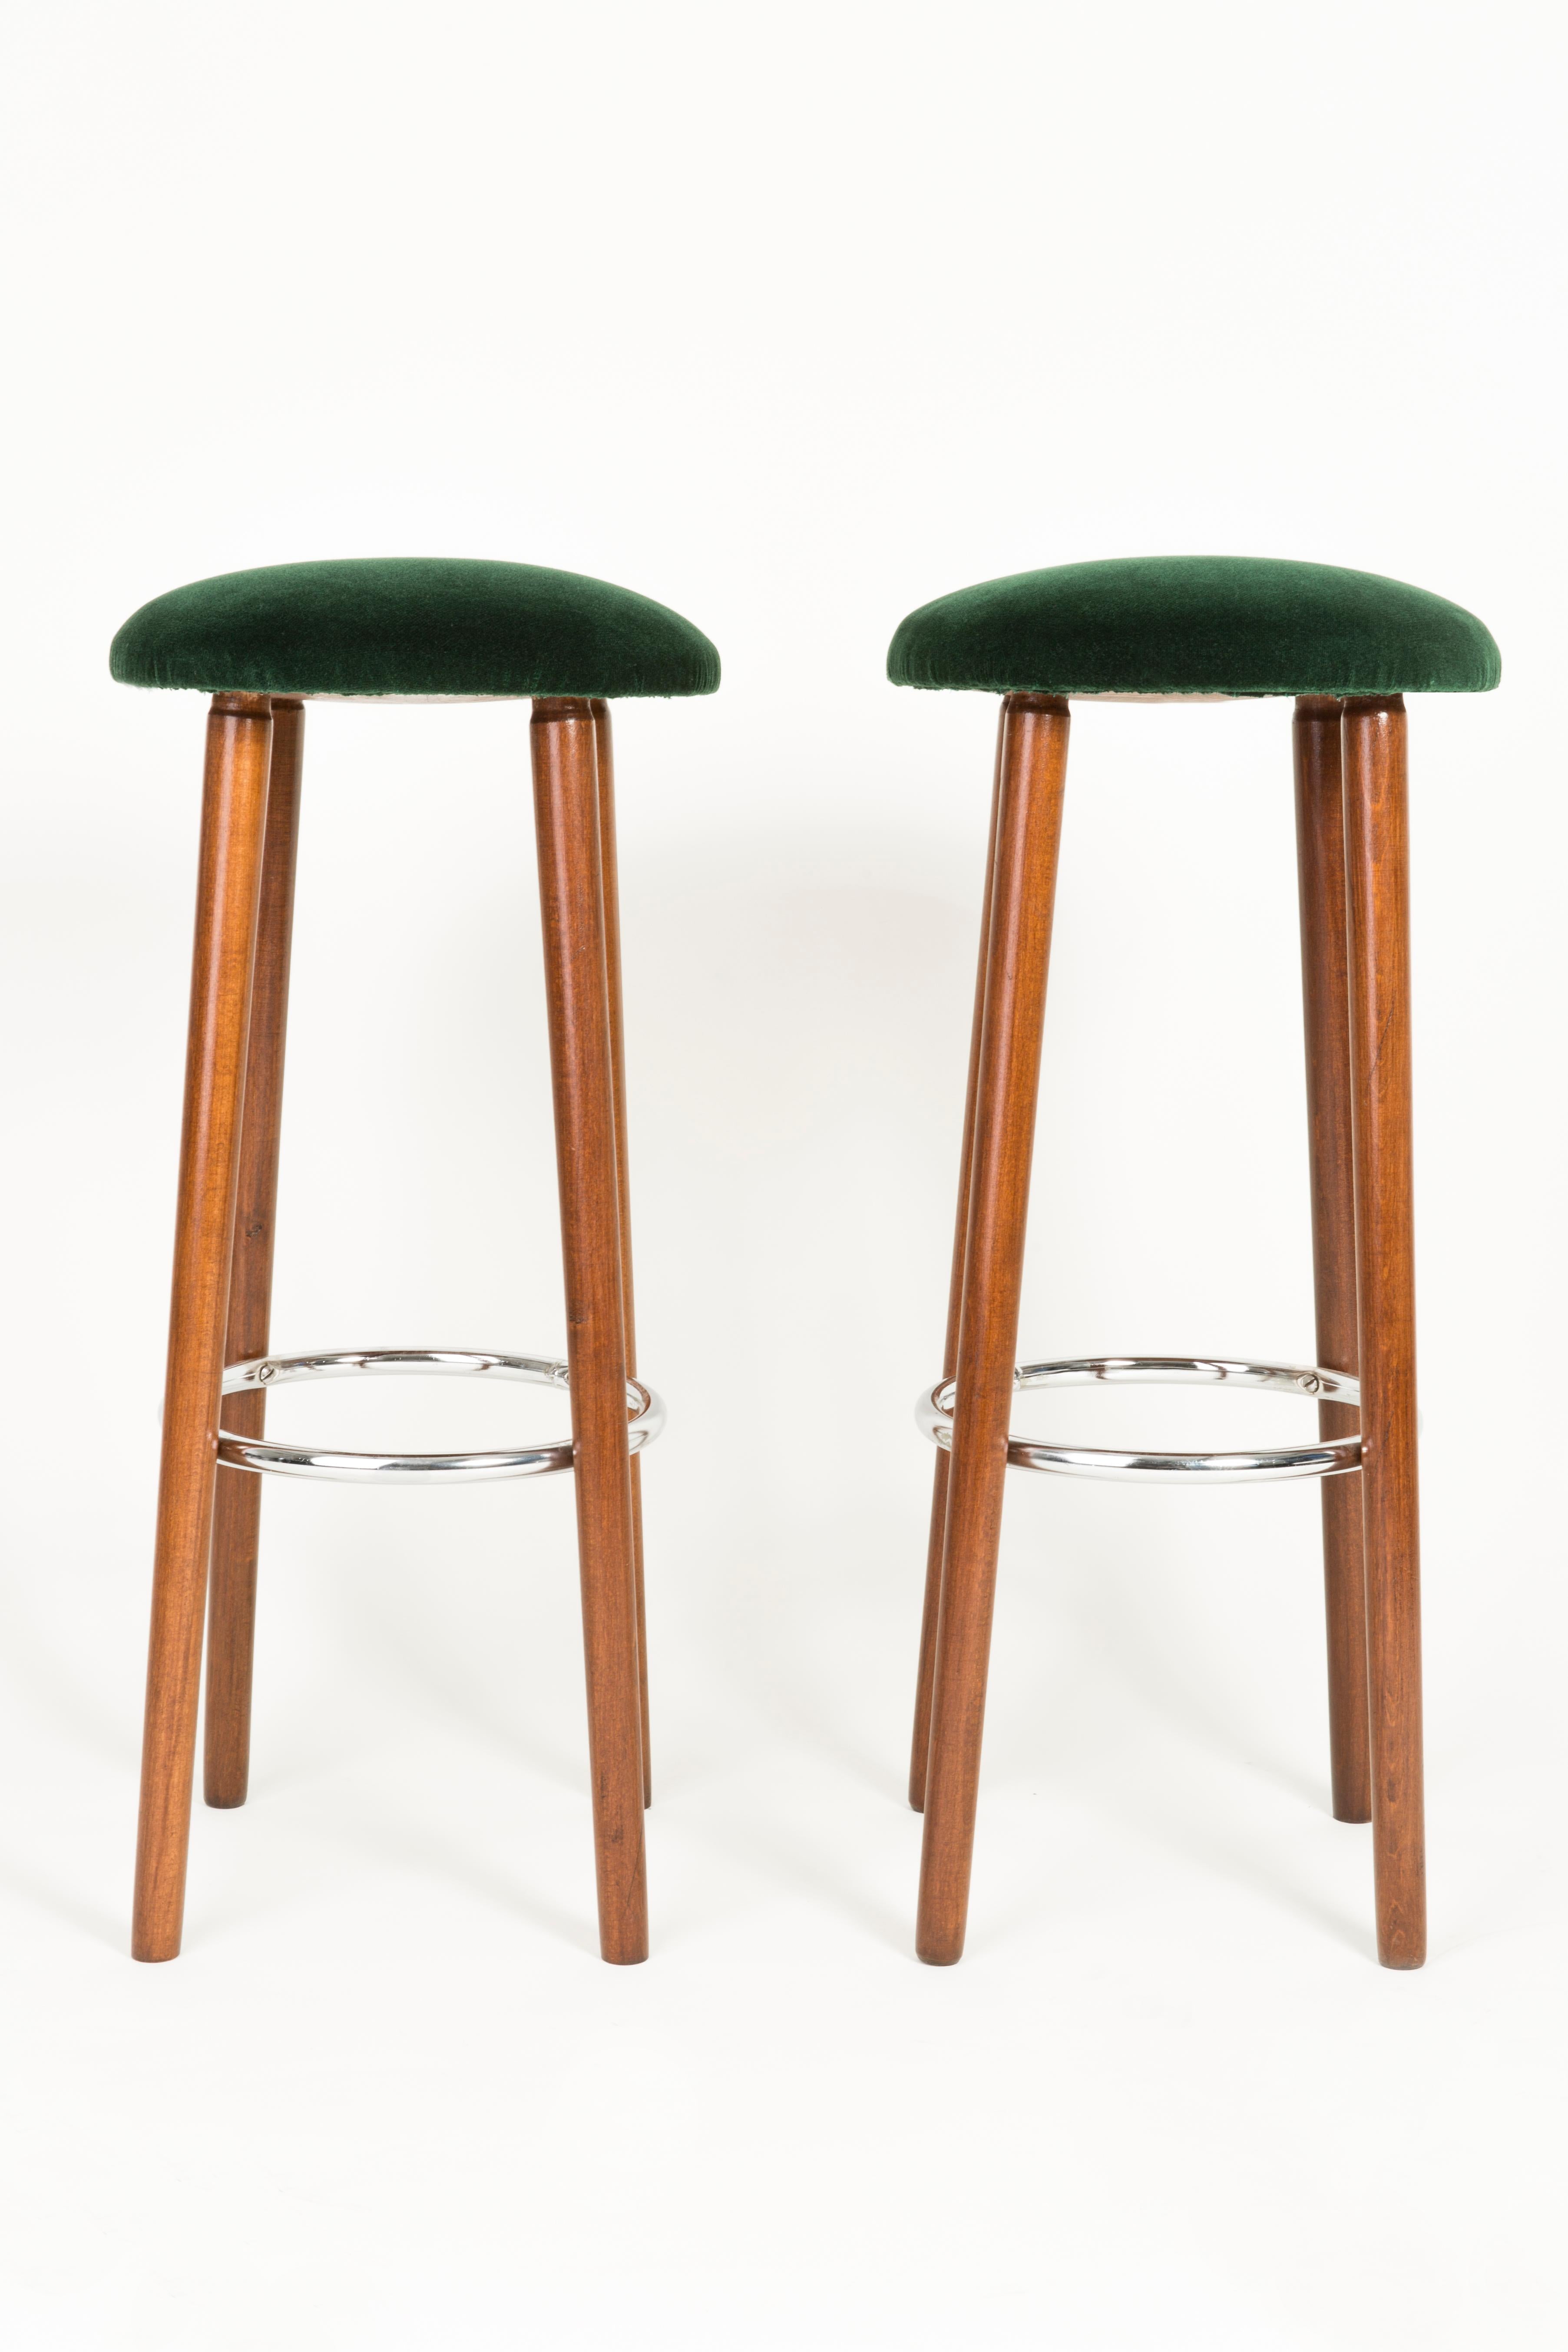 Stools from the turn of the 1960s and 1970s. Beautiful, well crafted dark green upholstery. The stools consists of an upholstered part, a seat and wooden legs narrowing downwards, characteristic of the 1960s style. We can prepare this set also in